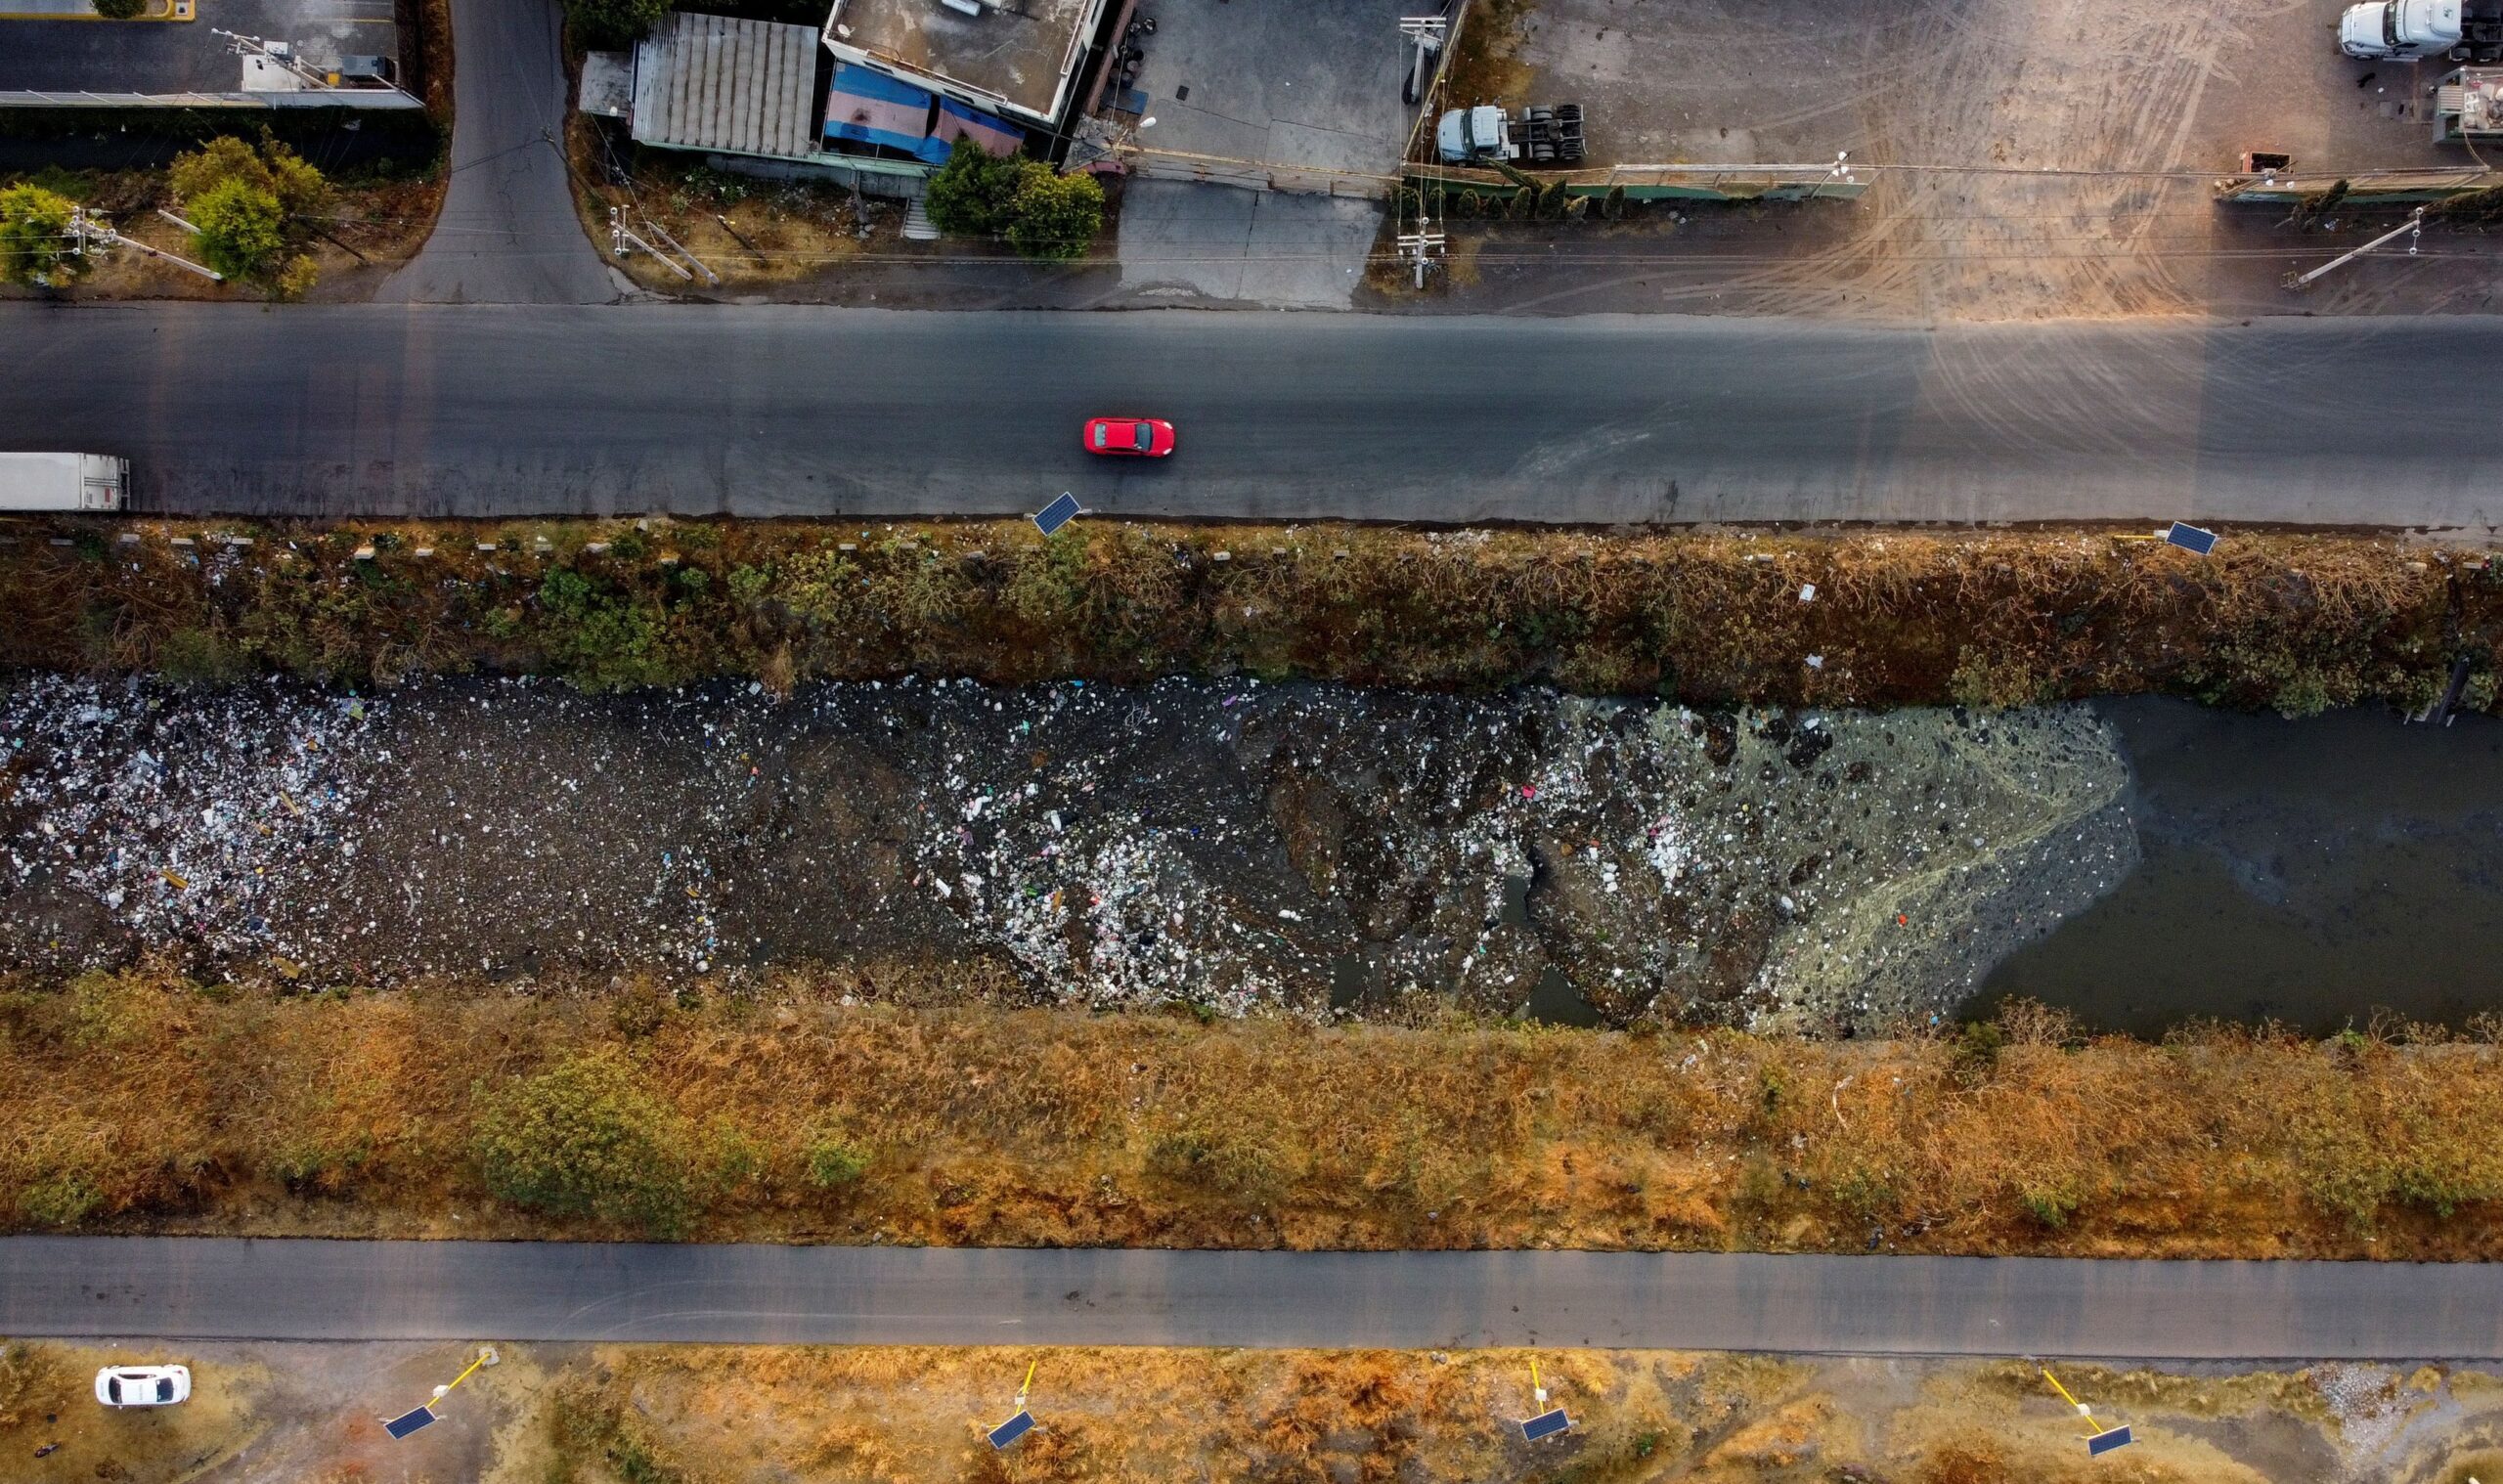 Cars move next to the Interceptor Poniente canal in Cuautitlan, State of Mexico, Mexico, March 18, 2021. Drainage system waterways around densely-populated Mexico City are heavily polluted. REUTERS/Carlos Jasso